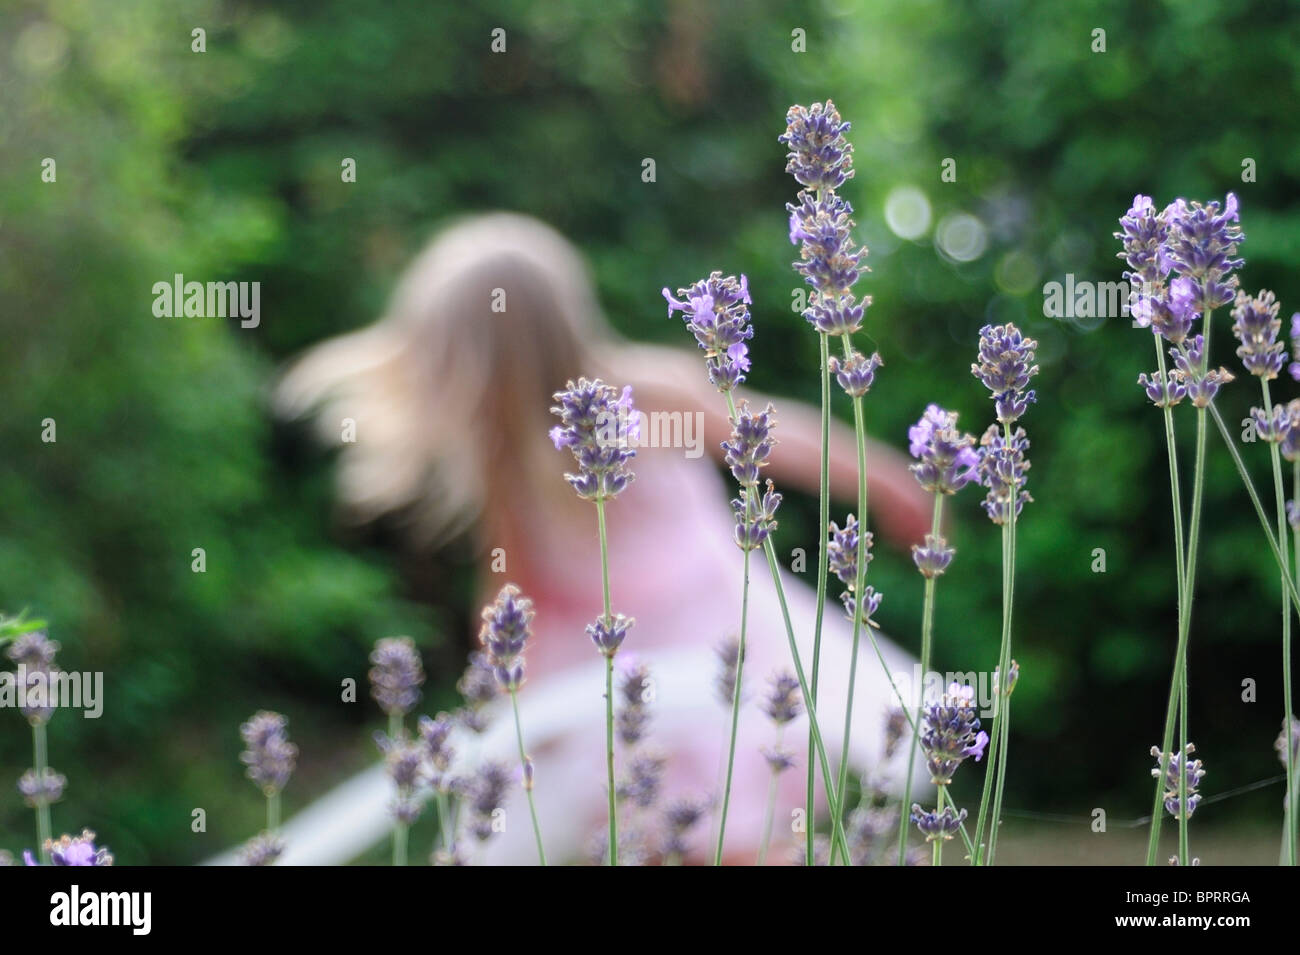 Blurred young girl dancing behind lavender Stock Photo